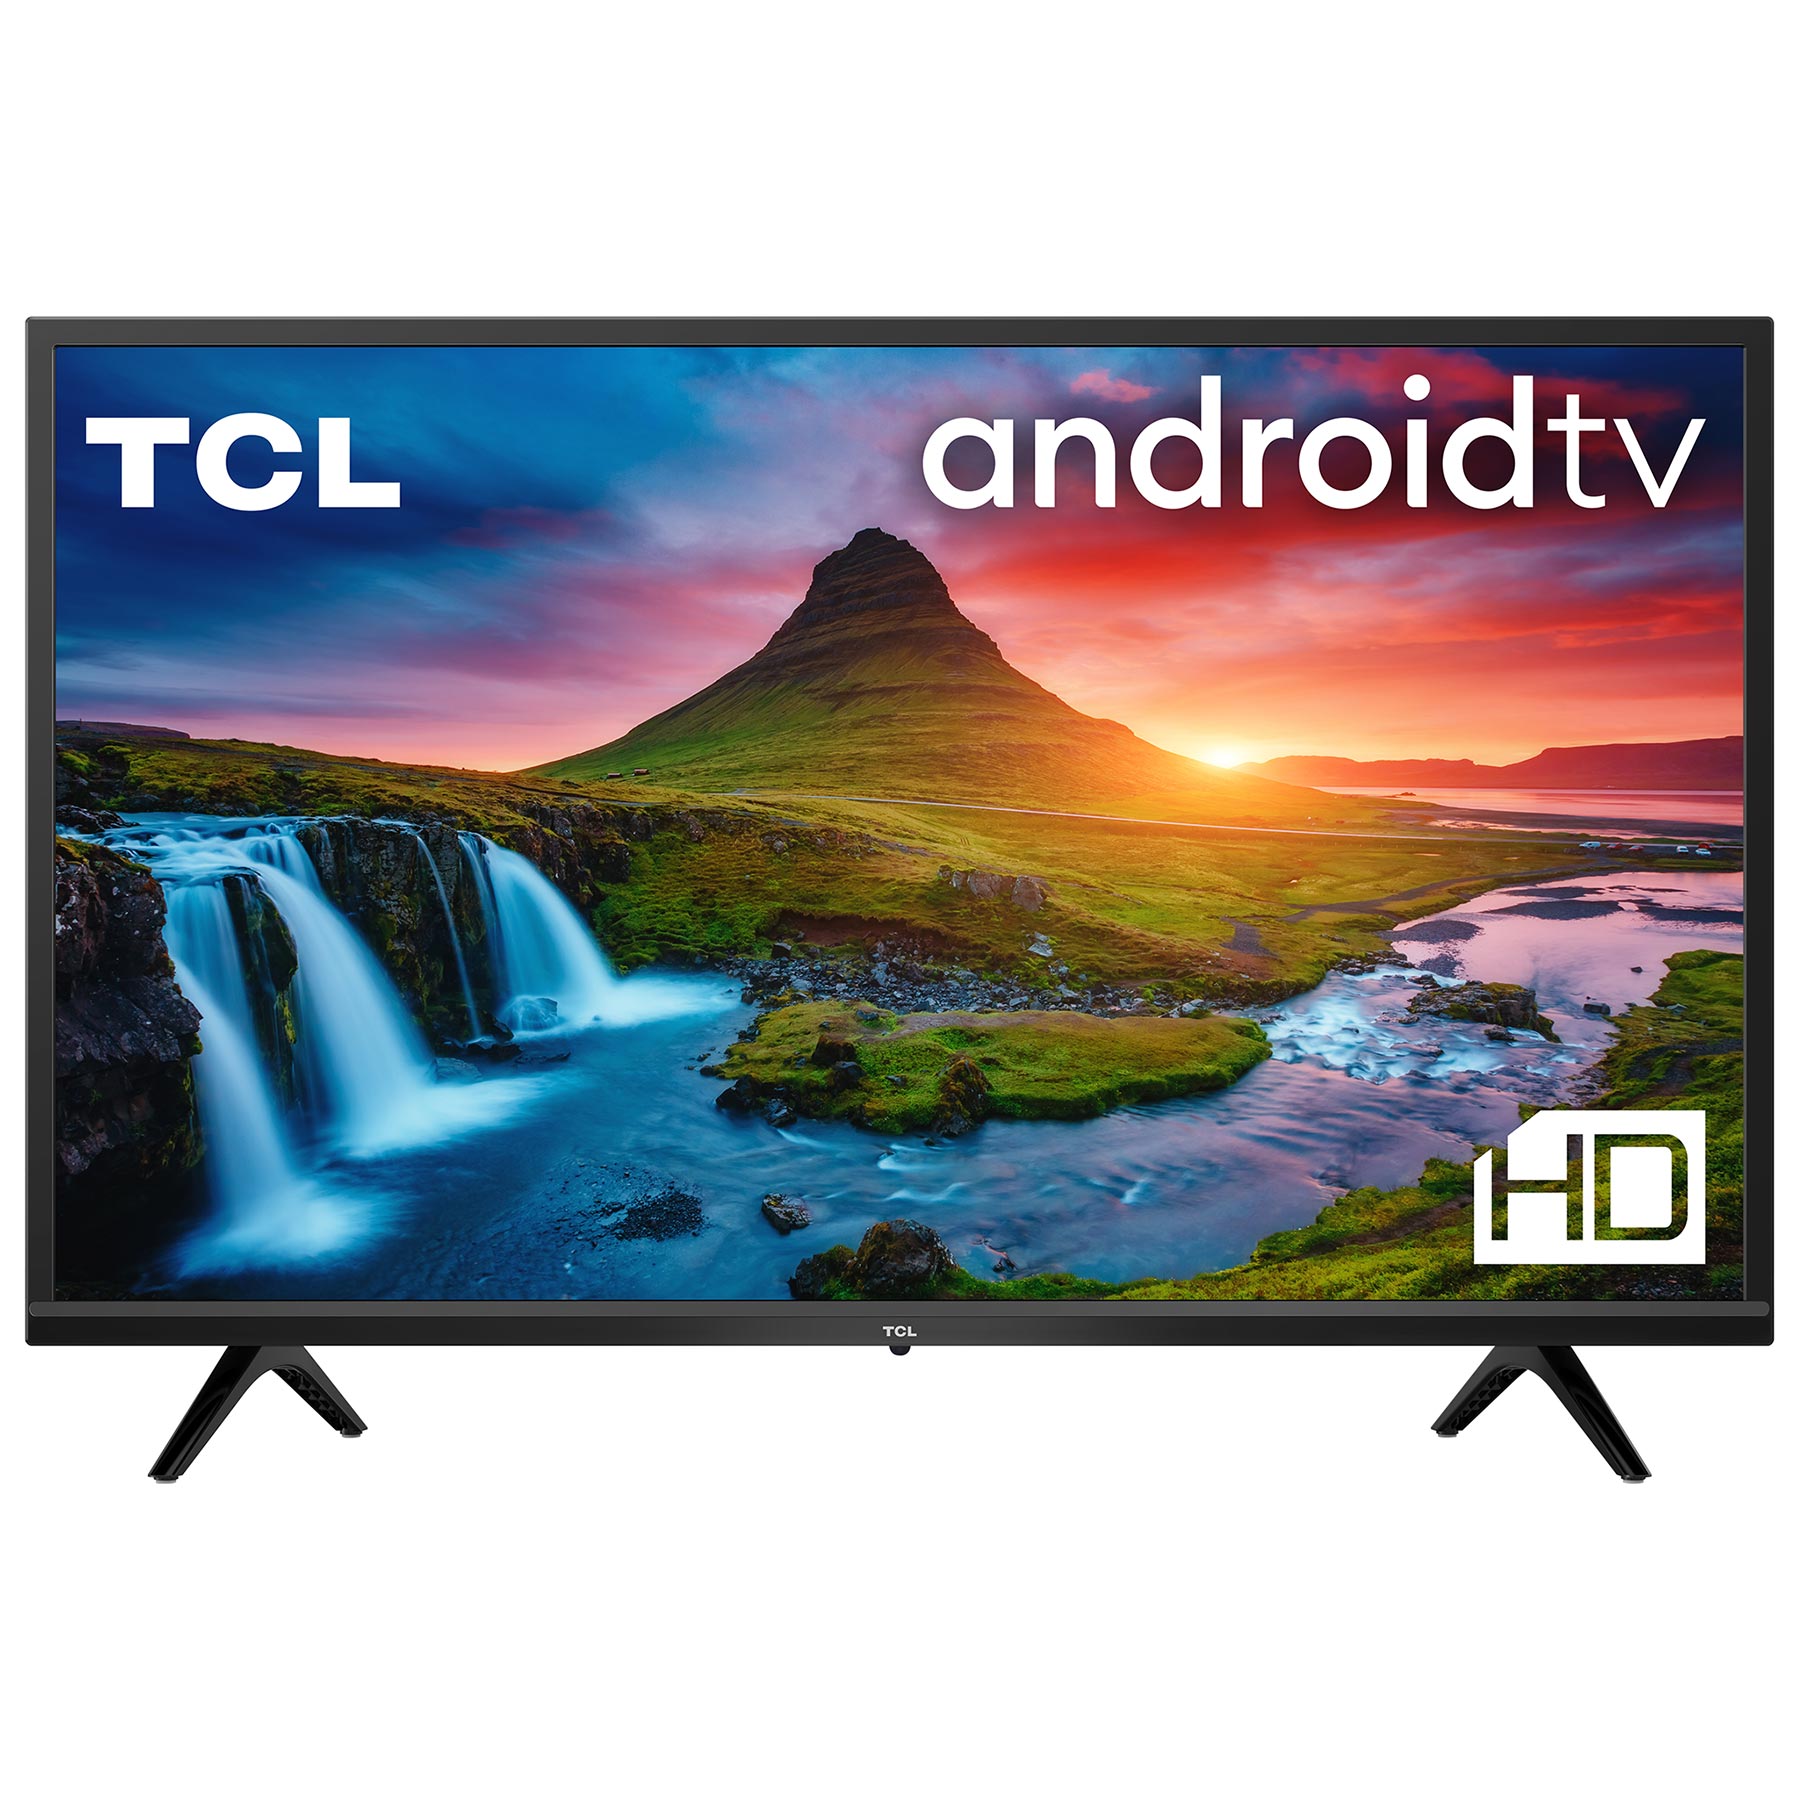 Image of TCL 32S5200K 32 HDR HD Ready Smart LED TV 300 PPI Freeview HD